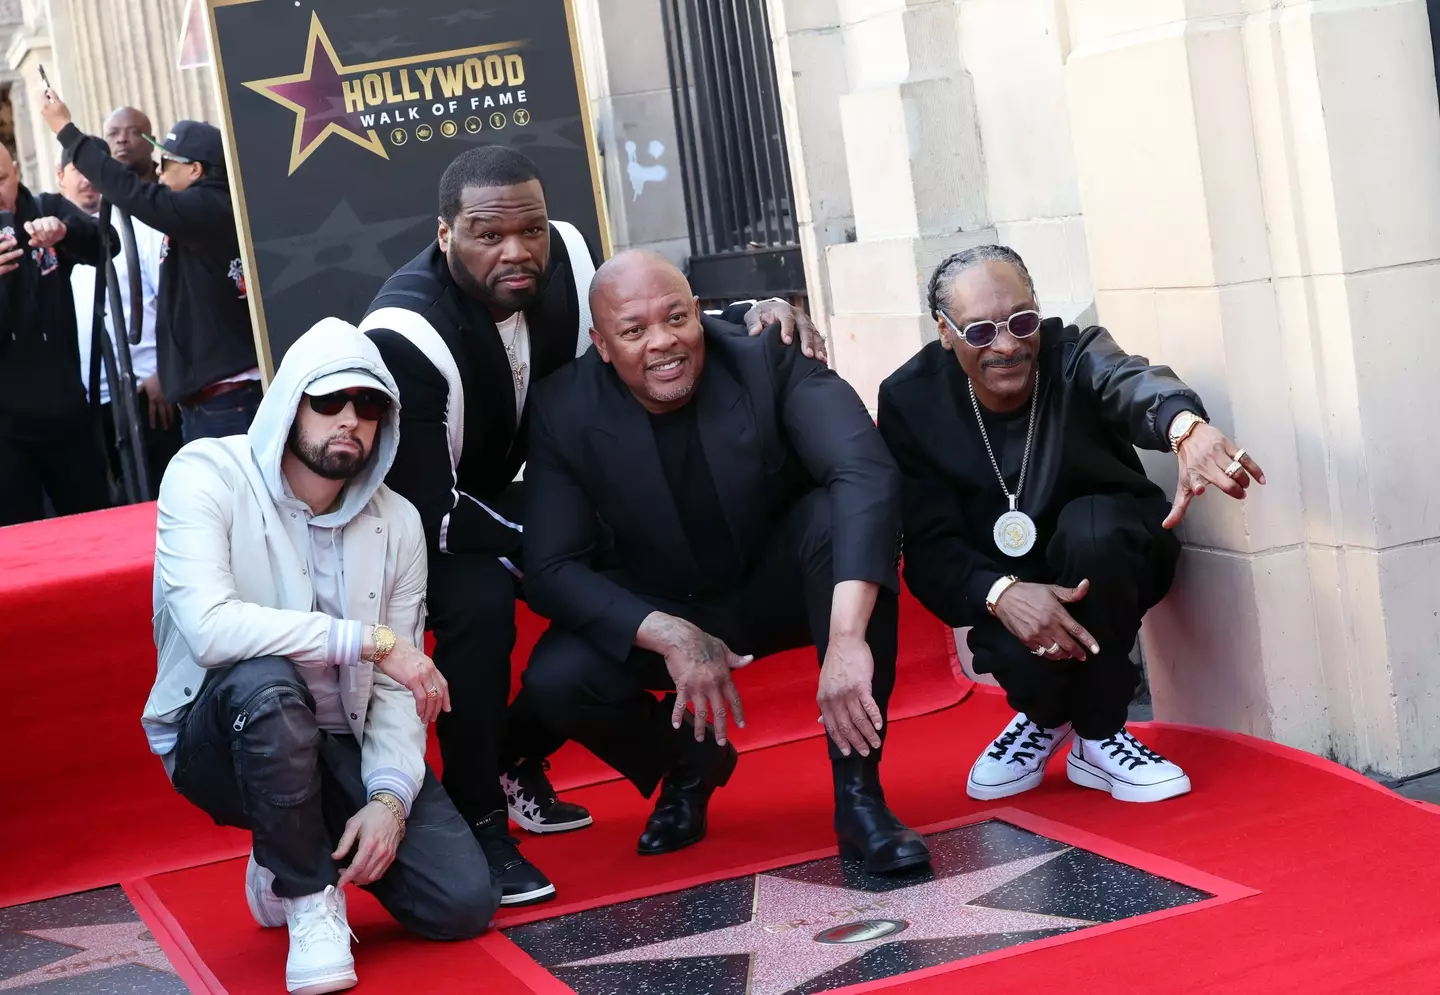 Dr Dre was joined by Eminem, 50 Cent and Snoop Dogg for his Walk of Fame ceremony.